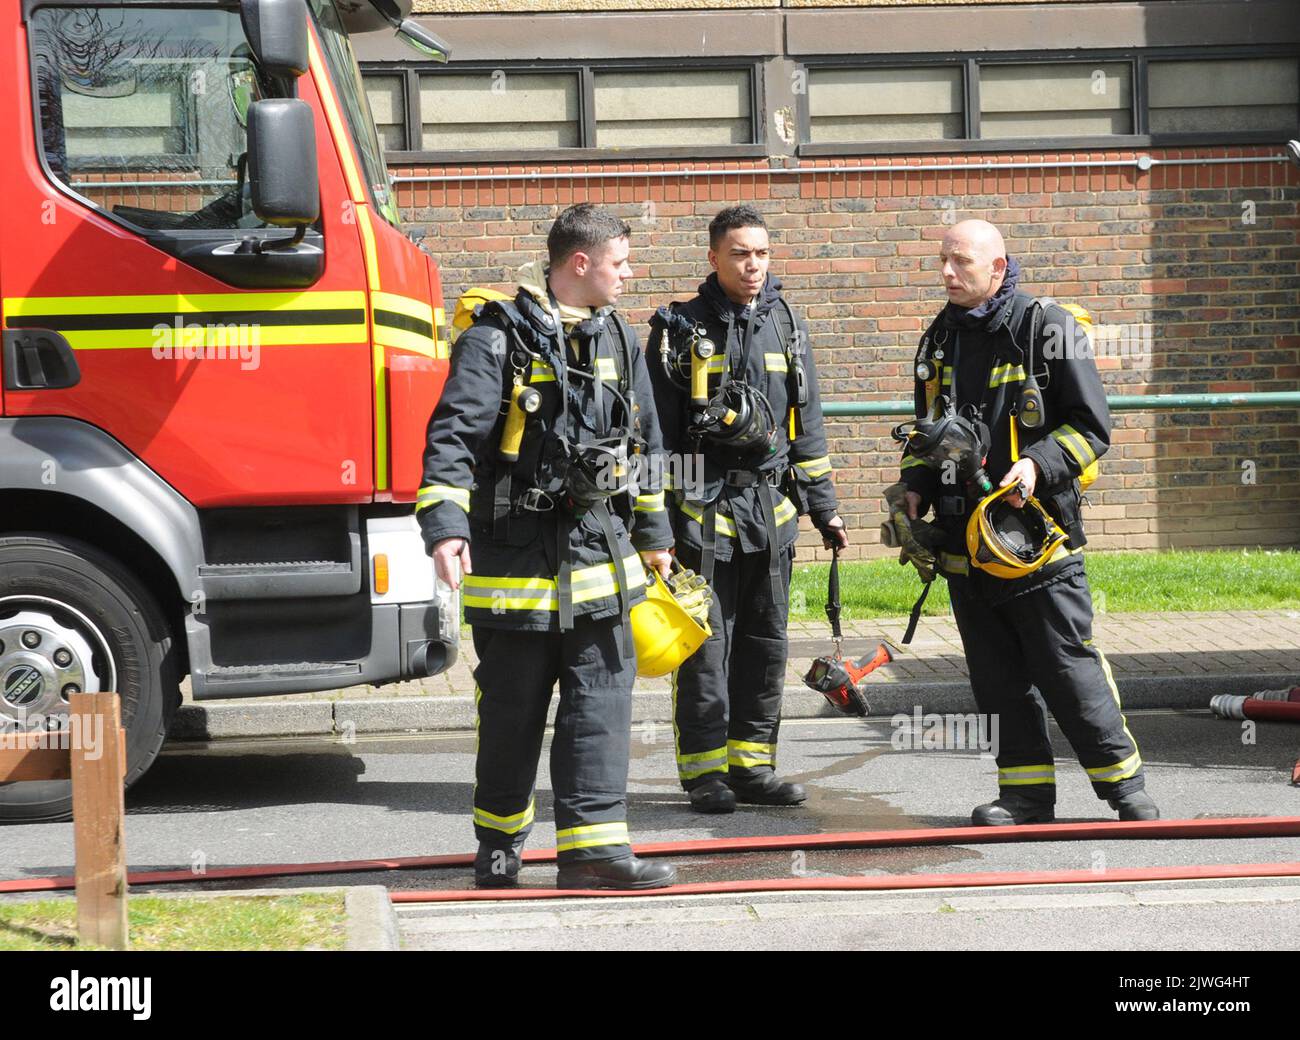 EMERGENCY SERVICES ATTEND A FIRE ON  13TH FLOOR OF BARKIS HOUSE IN PORTSMOUTH. PIC MIKE WALKER, 2013 Stock Photo